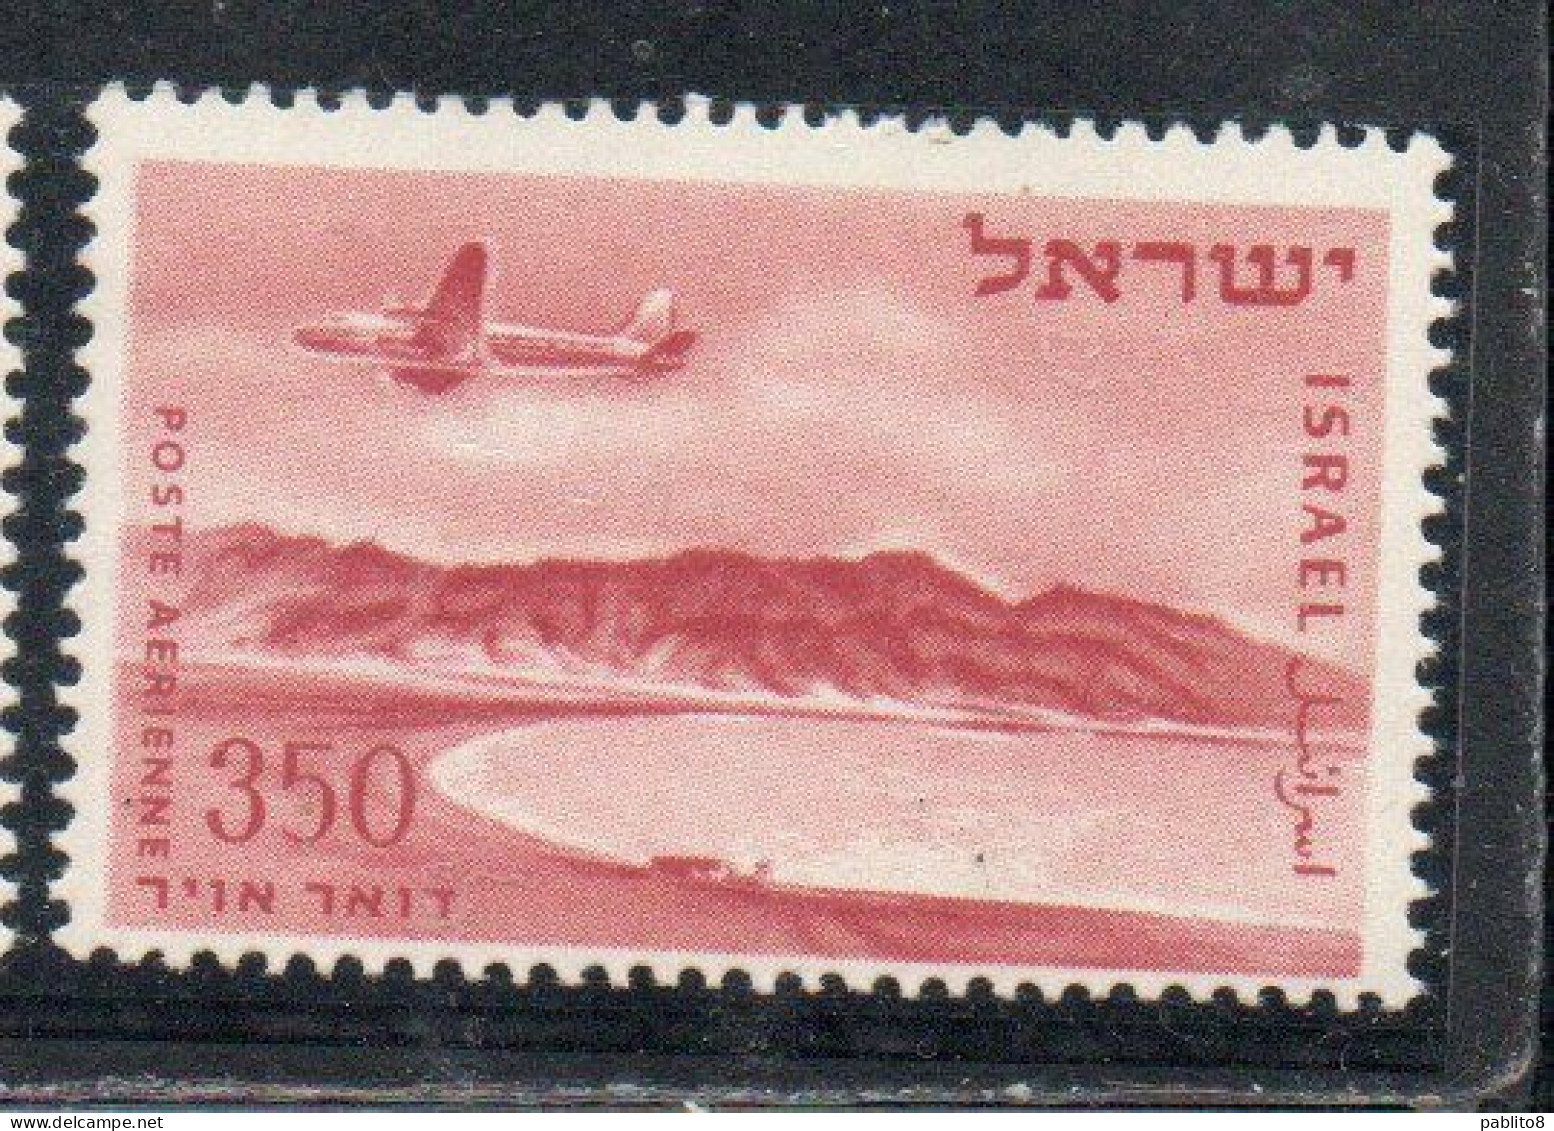 ISRAEL ISRAELE 1953 1956 AIRMAIL AIR POST MAIL BAY OF ELAT RED SEA 350p MNH - Poste Aérienne